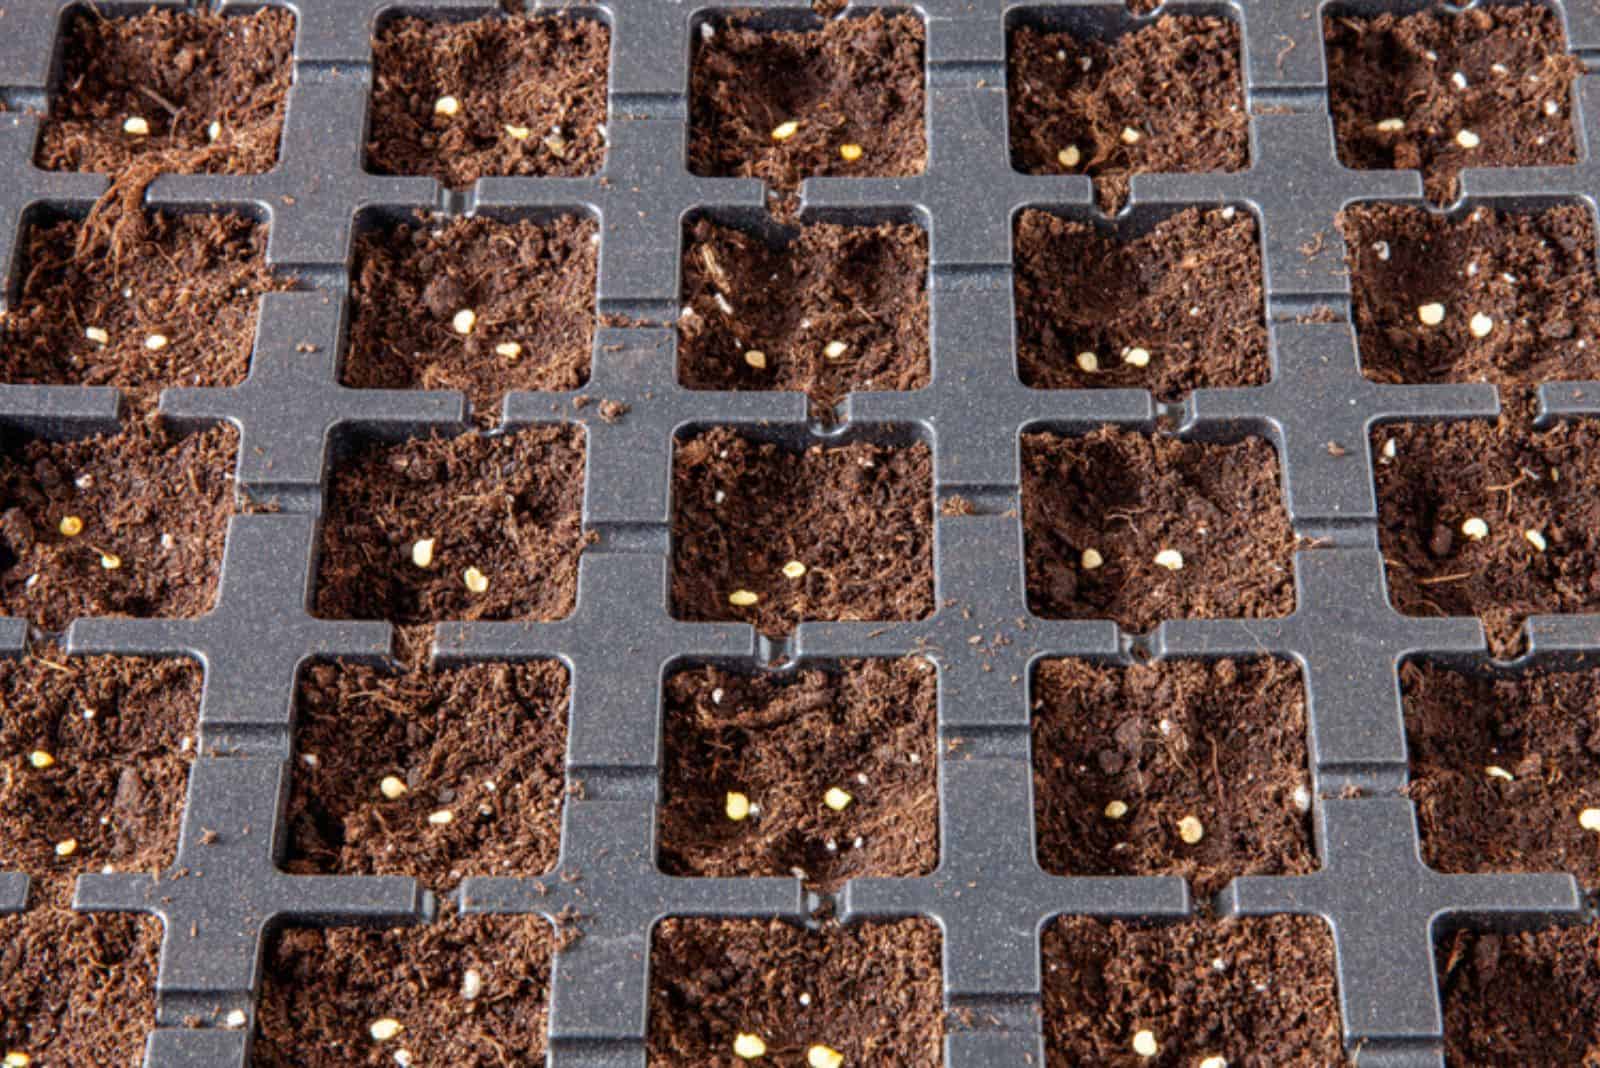 Starting tray for seed germination with freshly planted seeds